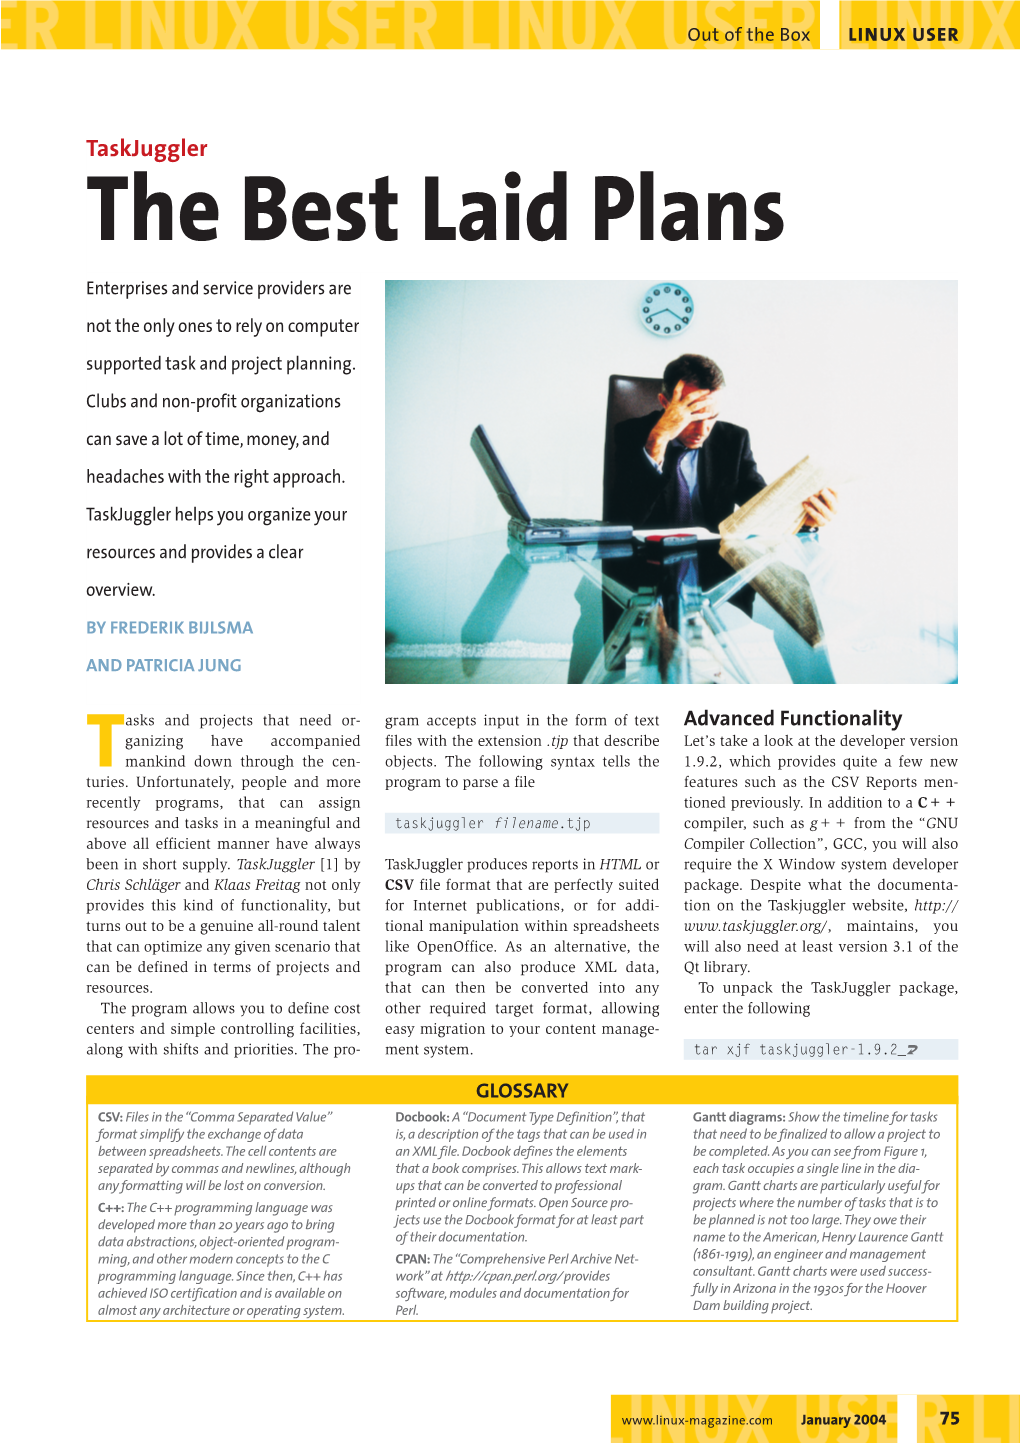 The Best Laid Plans Enterprises and Service Providers Are Not the Only Ones to Rely on Computer Supported Task and Project Planning